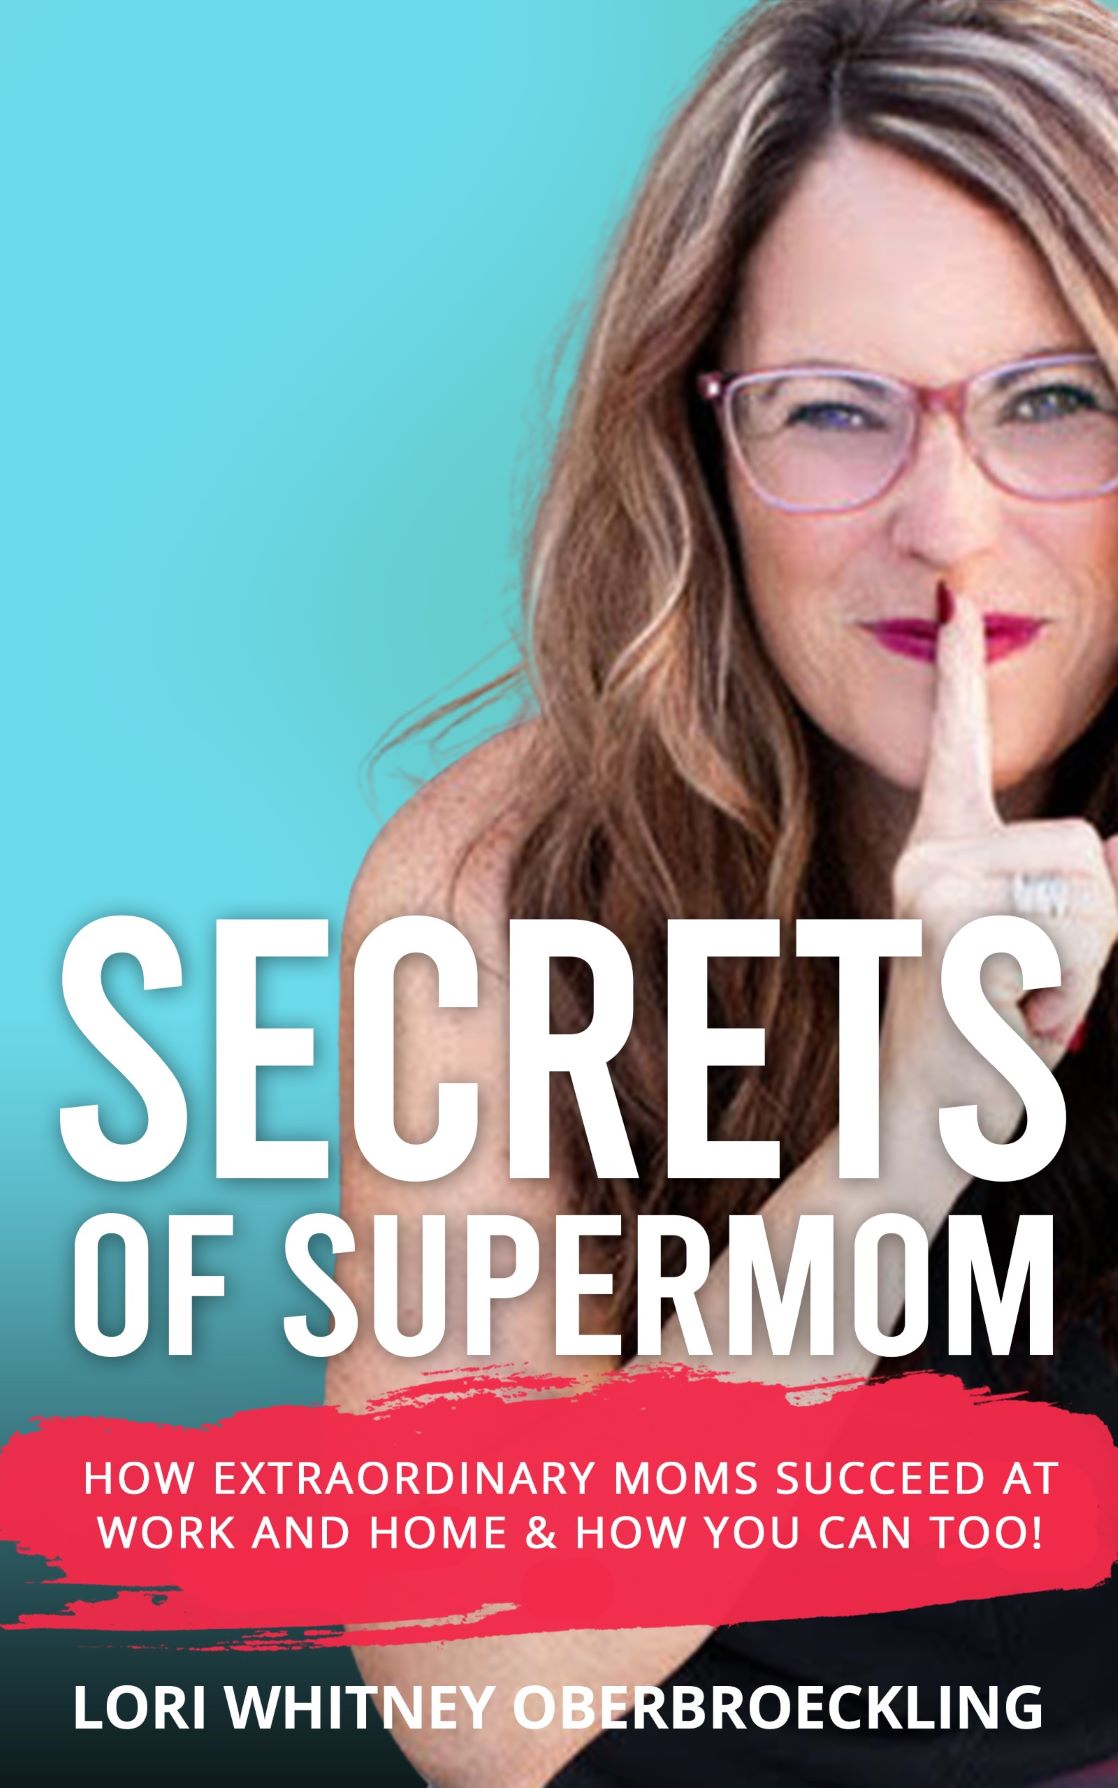 FREE: Secrets of Supermom: How Extraordinary Moms Succeed at Work and Home & How You Can Too! by Lori Whitney Oberbroeckling